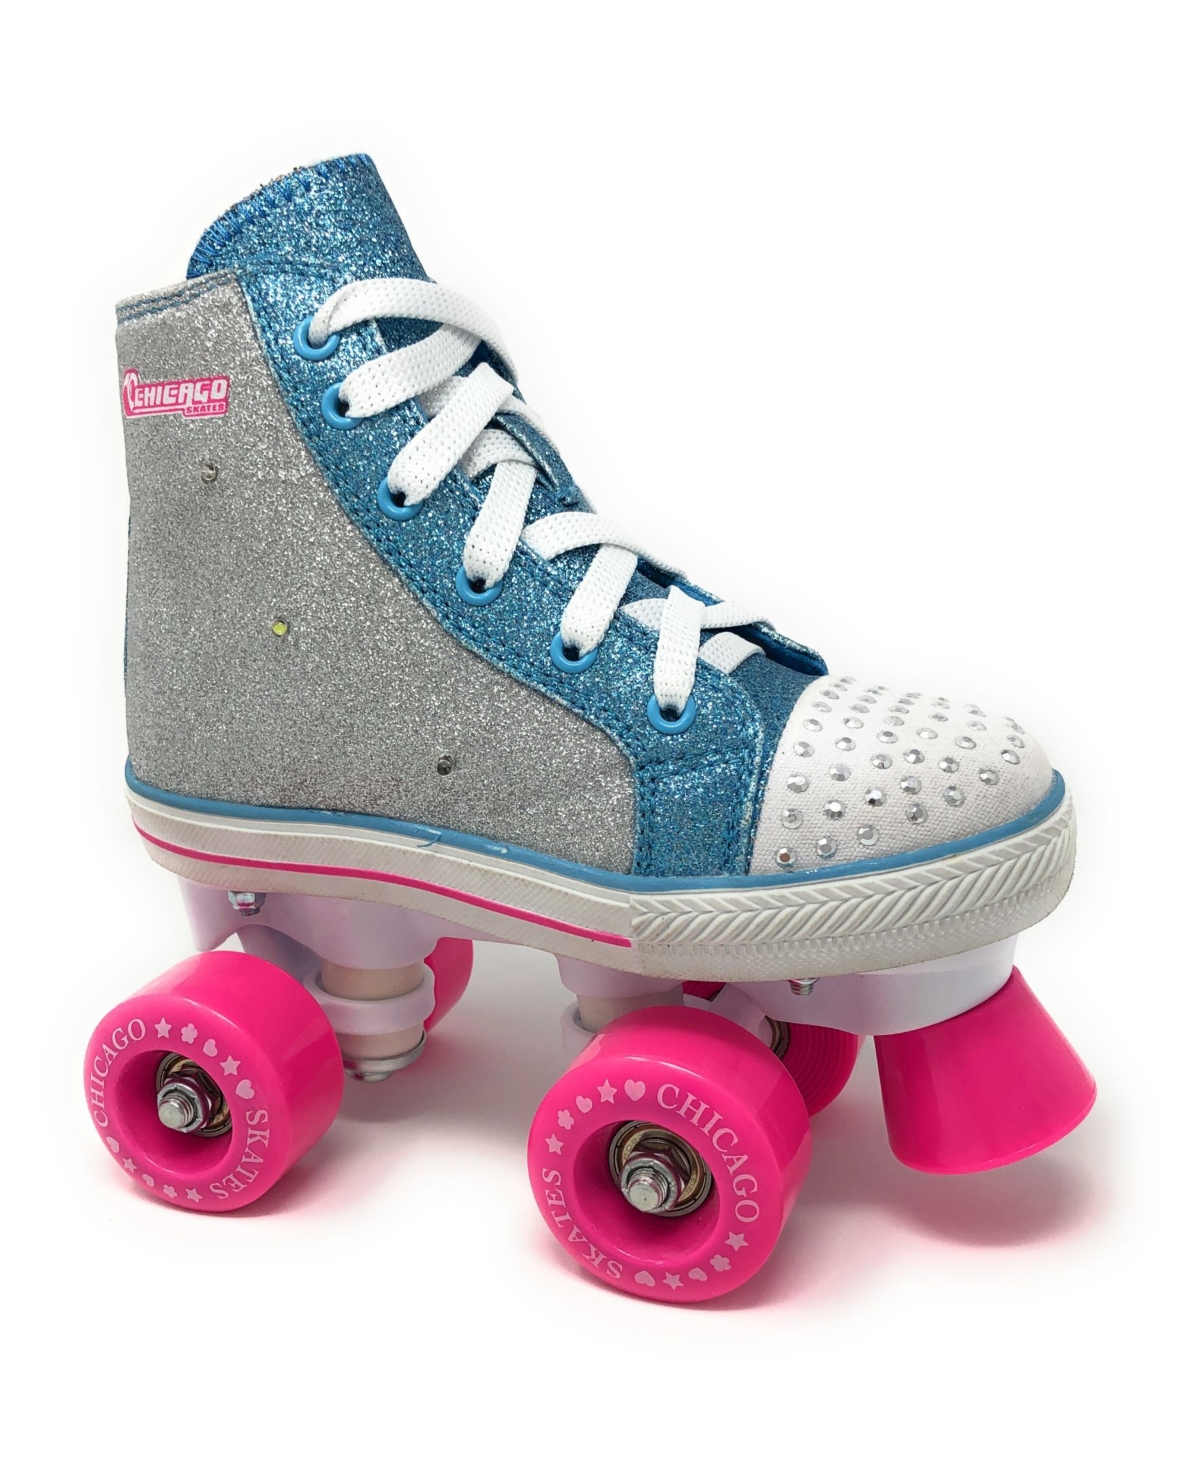 Fashion All-Star Quad Roller Skate - Size 4 - Miscellaneous